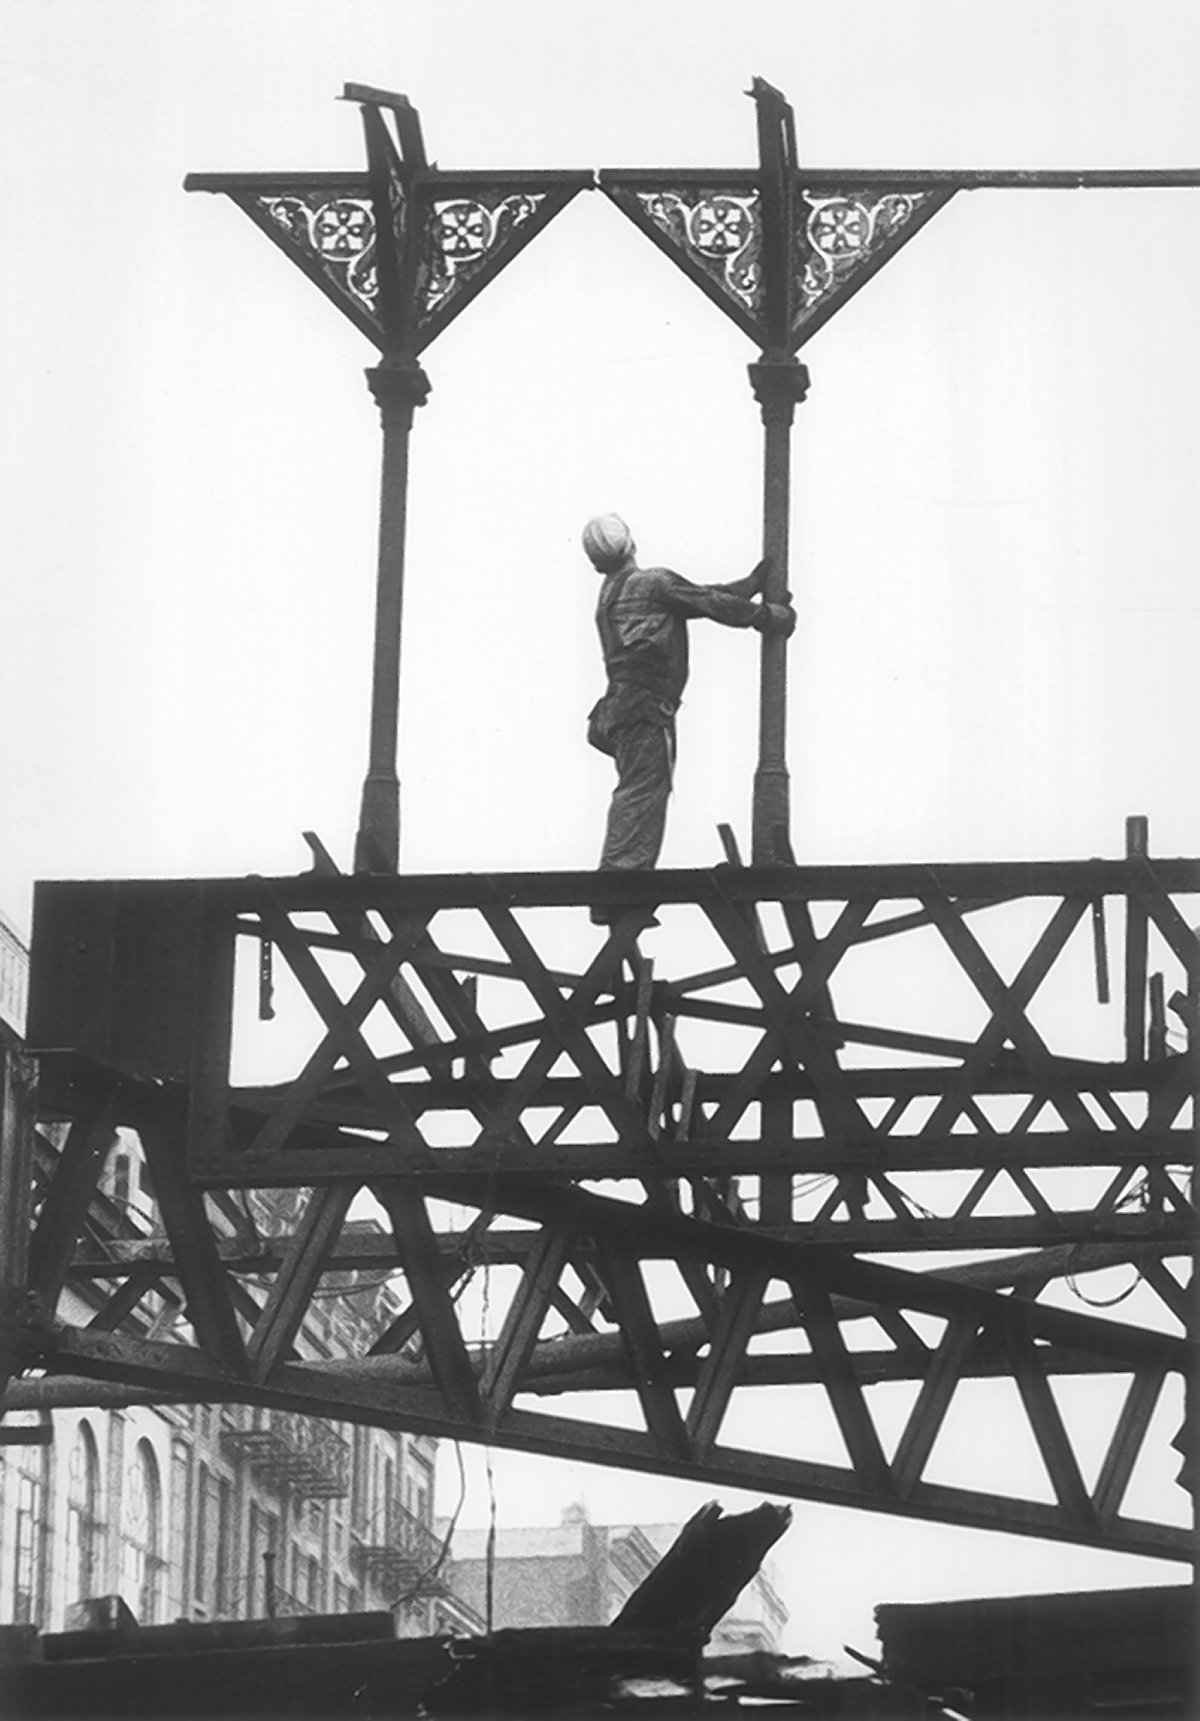 Taking down ornate roof supports at a station of the Third Ave. El. Photo by Sid Kaplan